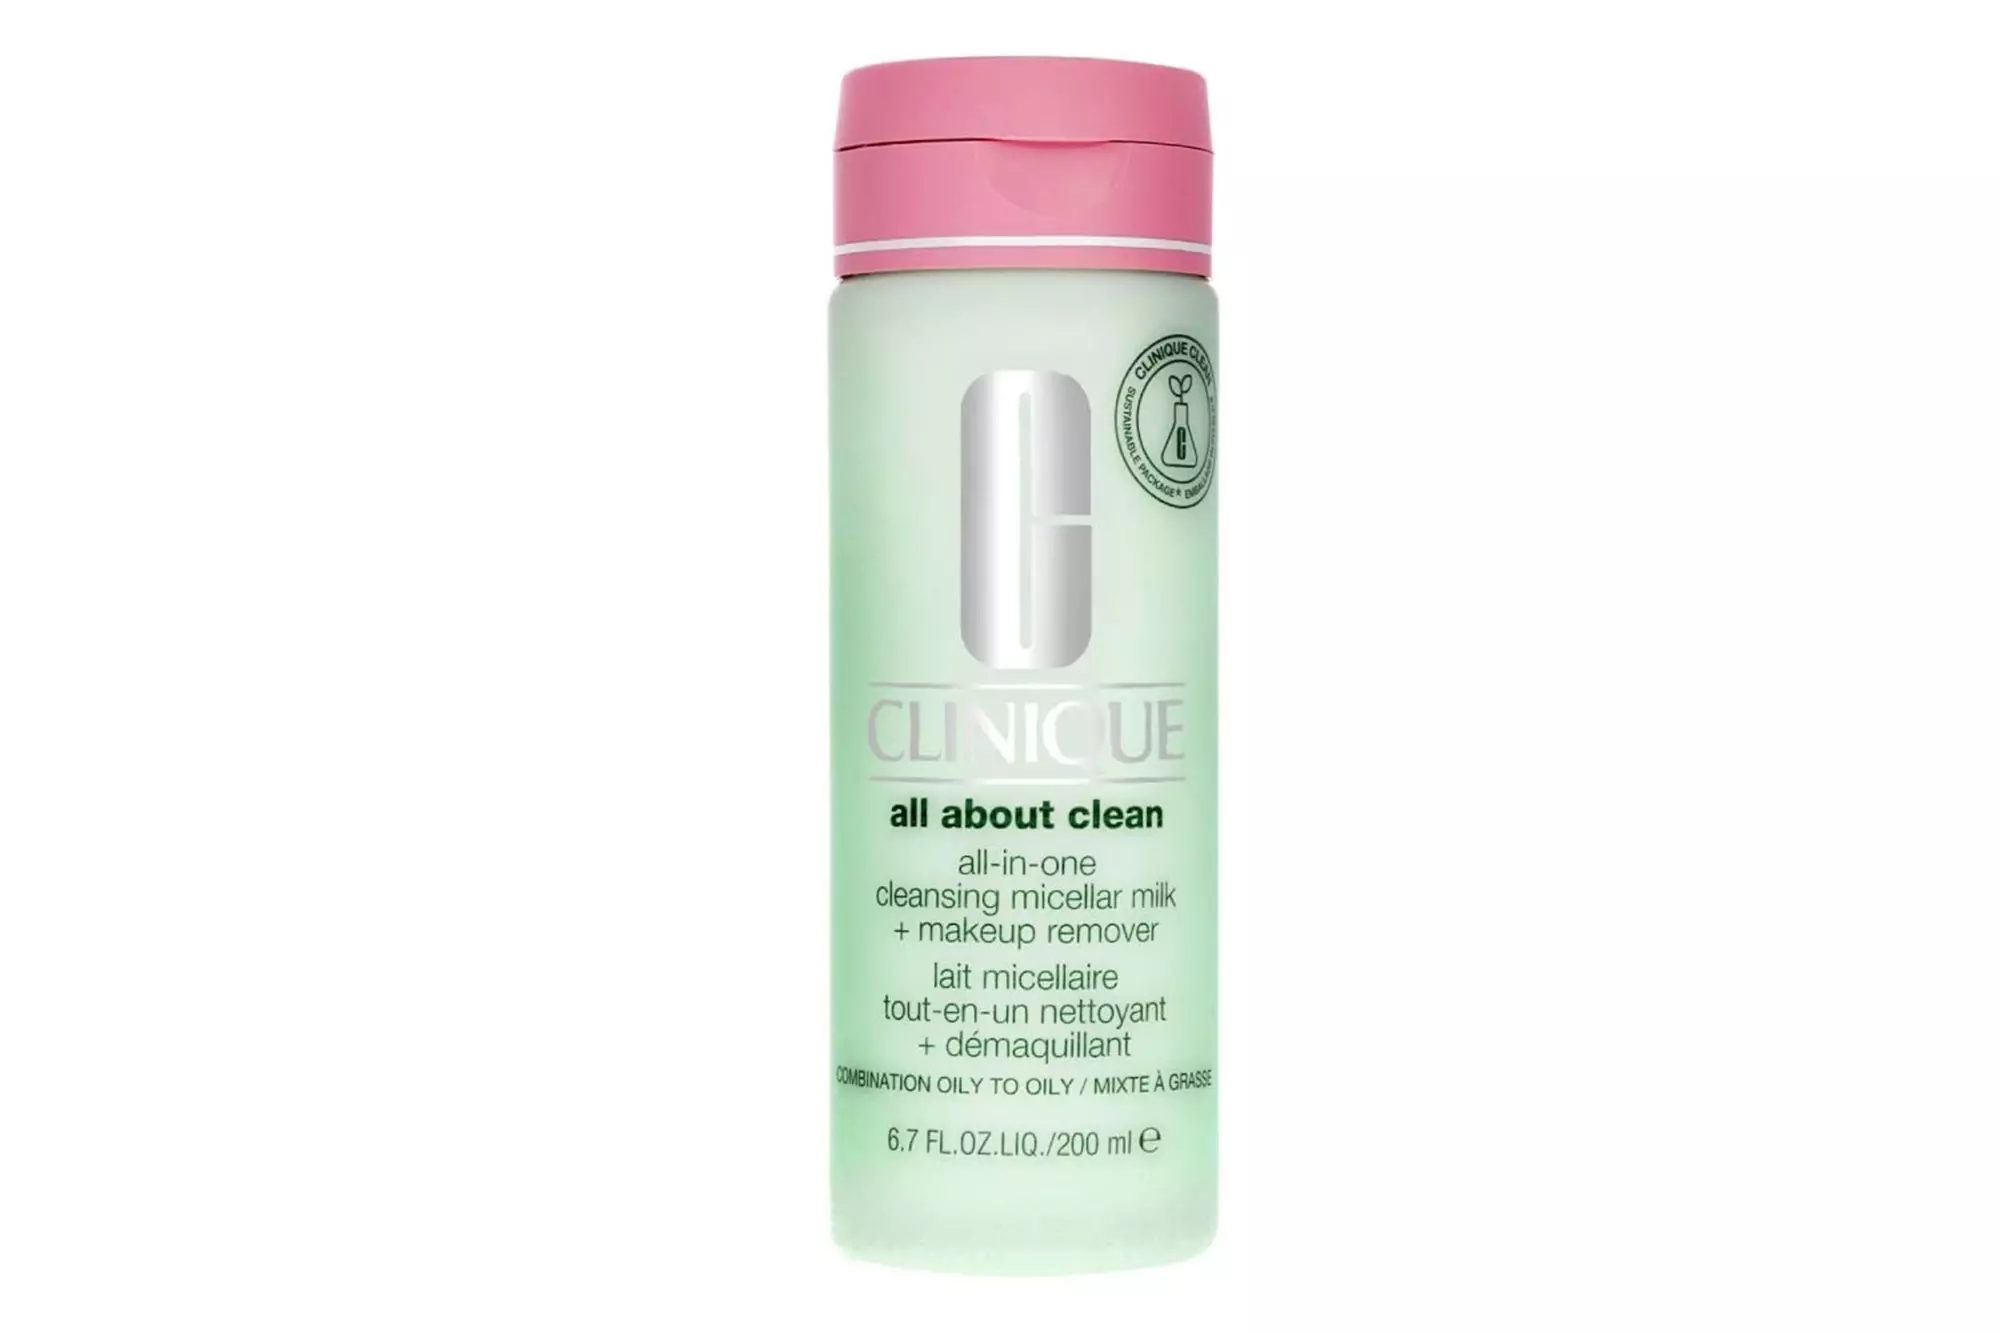 Clinique All About Clean All-in-One Cleansing Micellar Milk